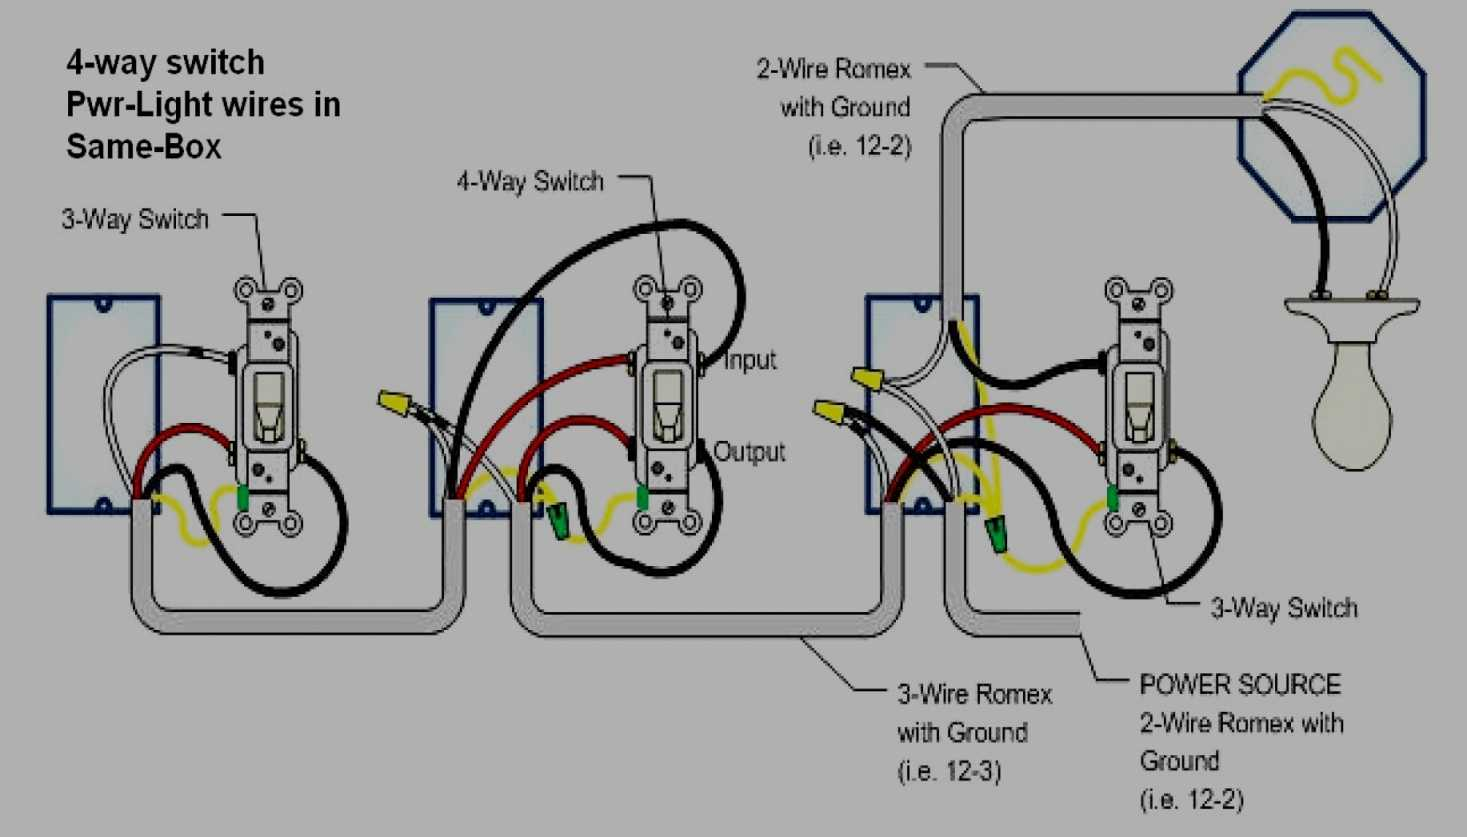 4Way Switch Wiring Diagram Electrical Schematic To 4 Wire Romex Diagram Wiring Diagram Directory